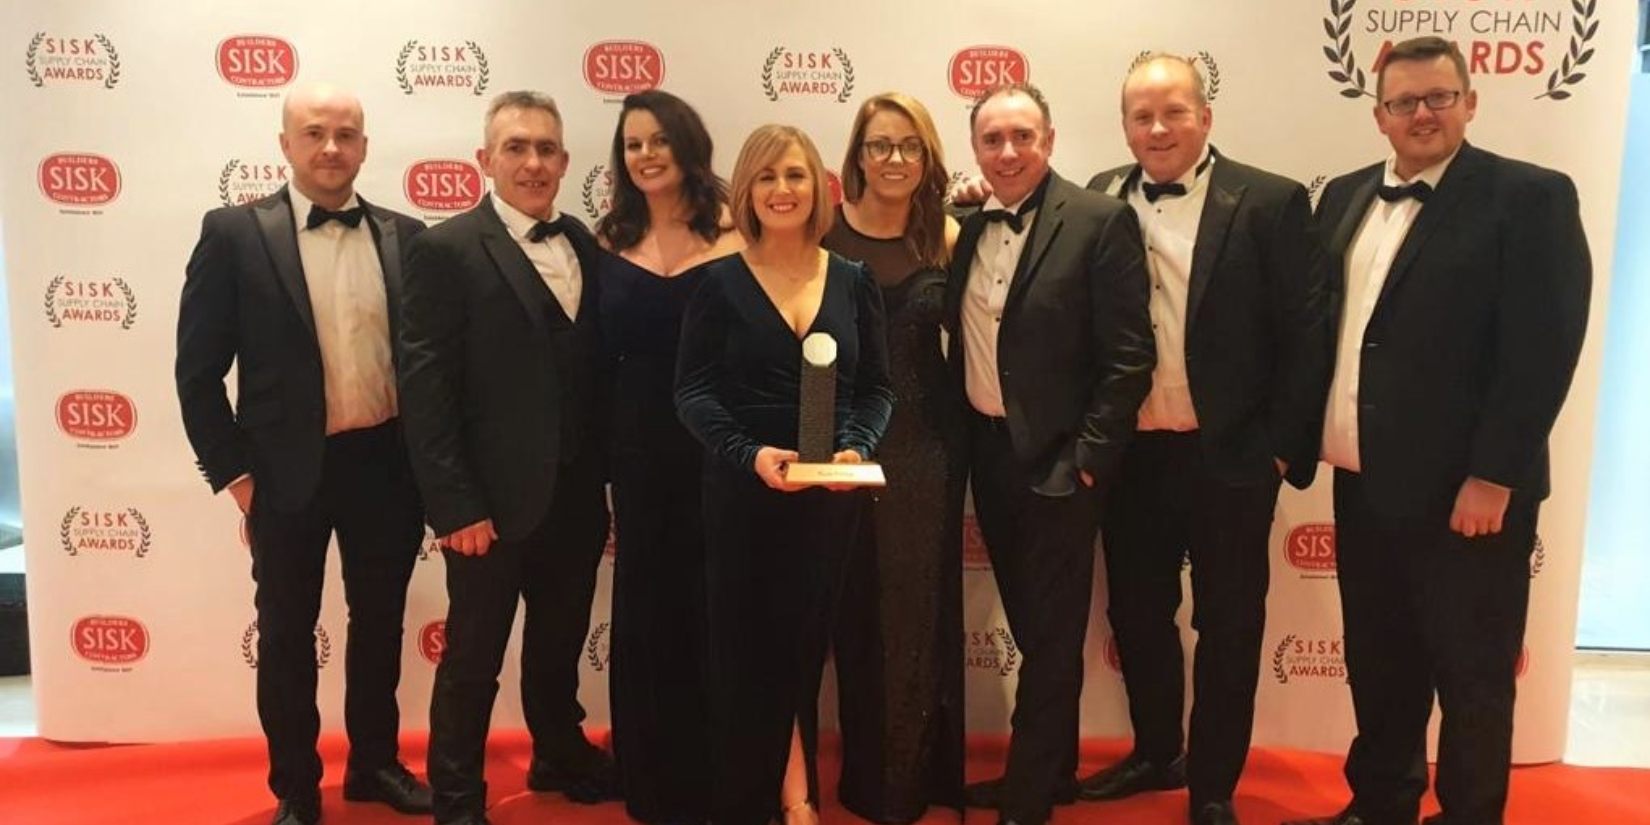 Pictured above with the award (L-R): Mark Robinson, Marty McMullan, Lauren McMullan-Carville, Aine McEvoy, Sarah Nicol, Daniel O'Rourke, James Murray and Colin Telford